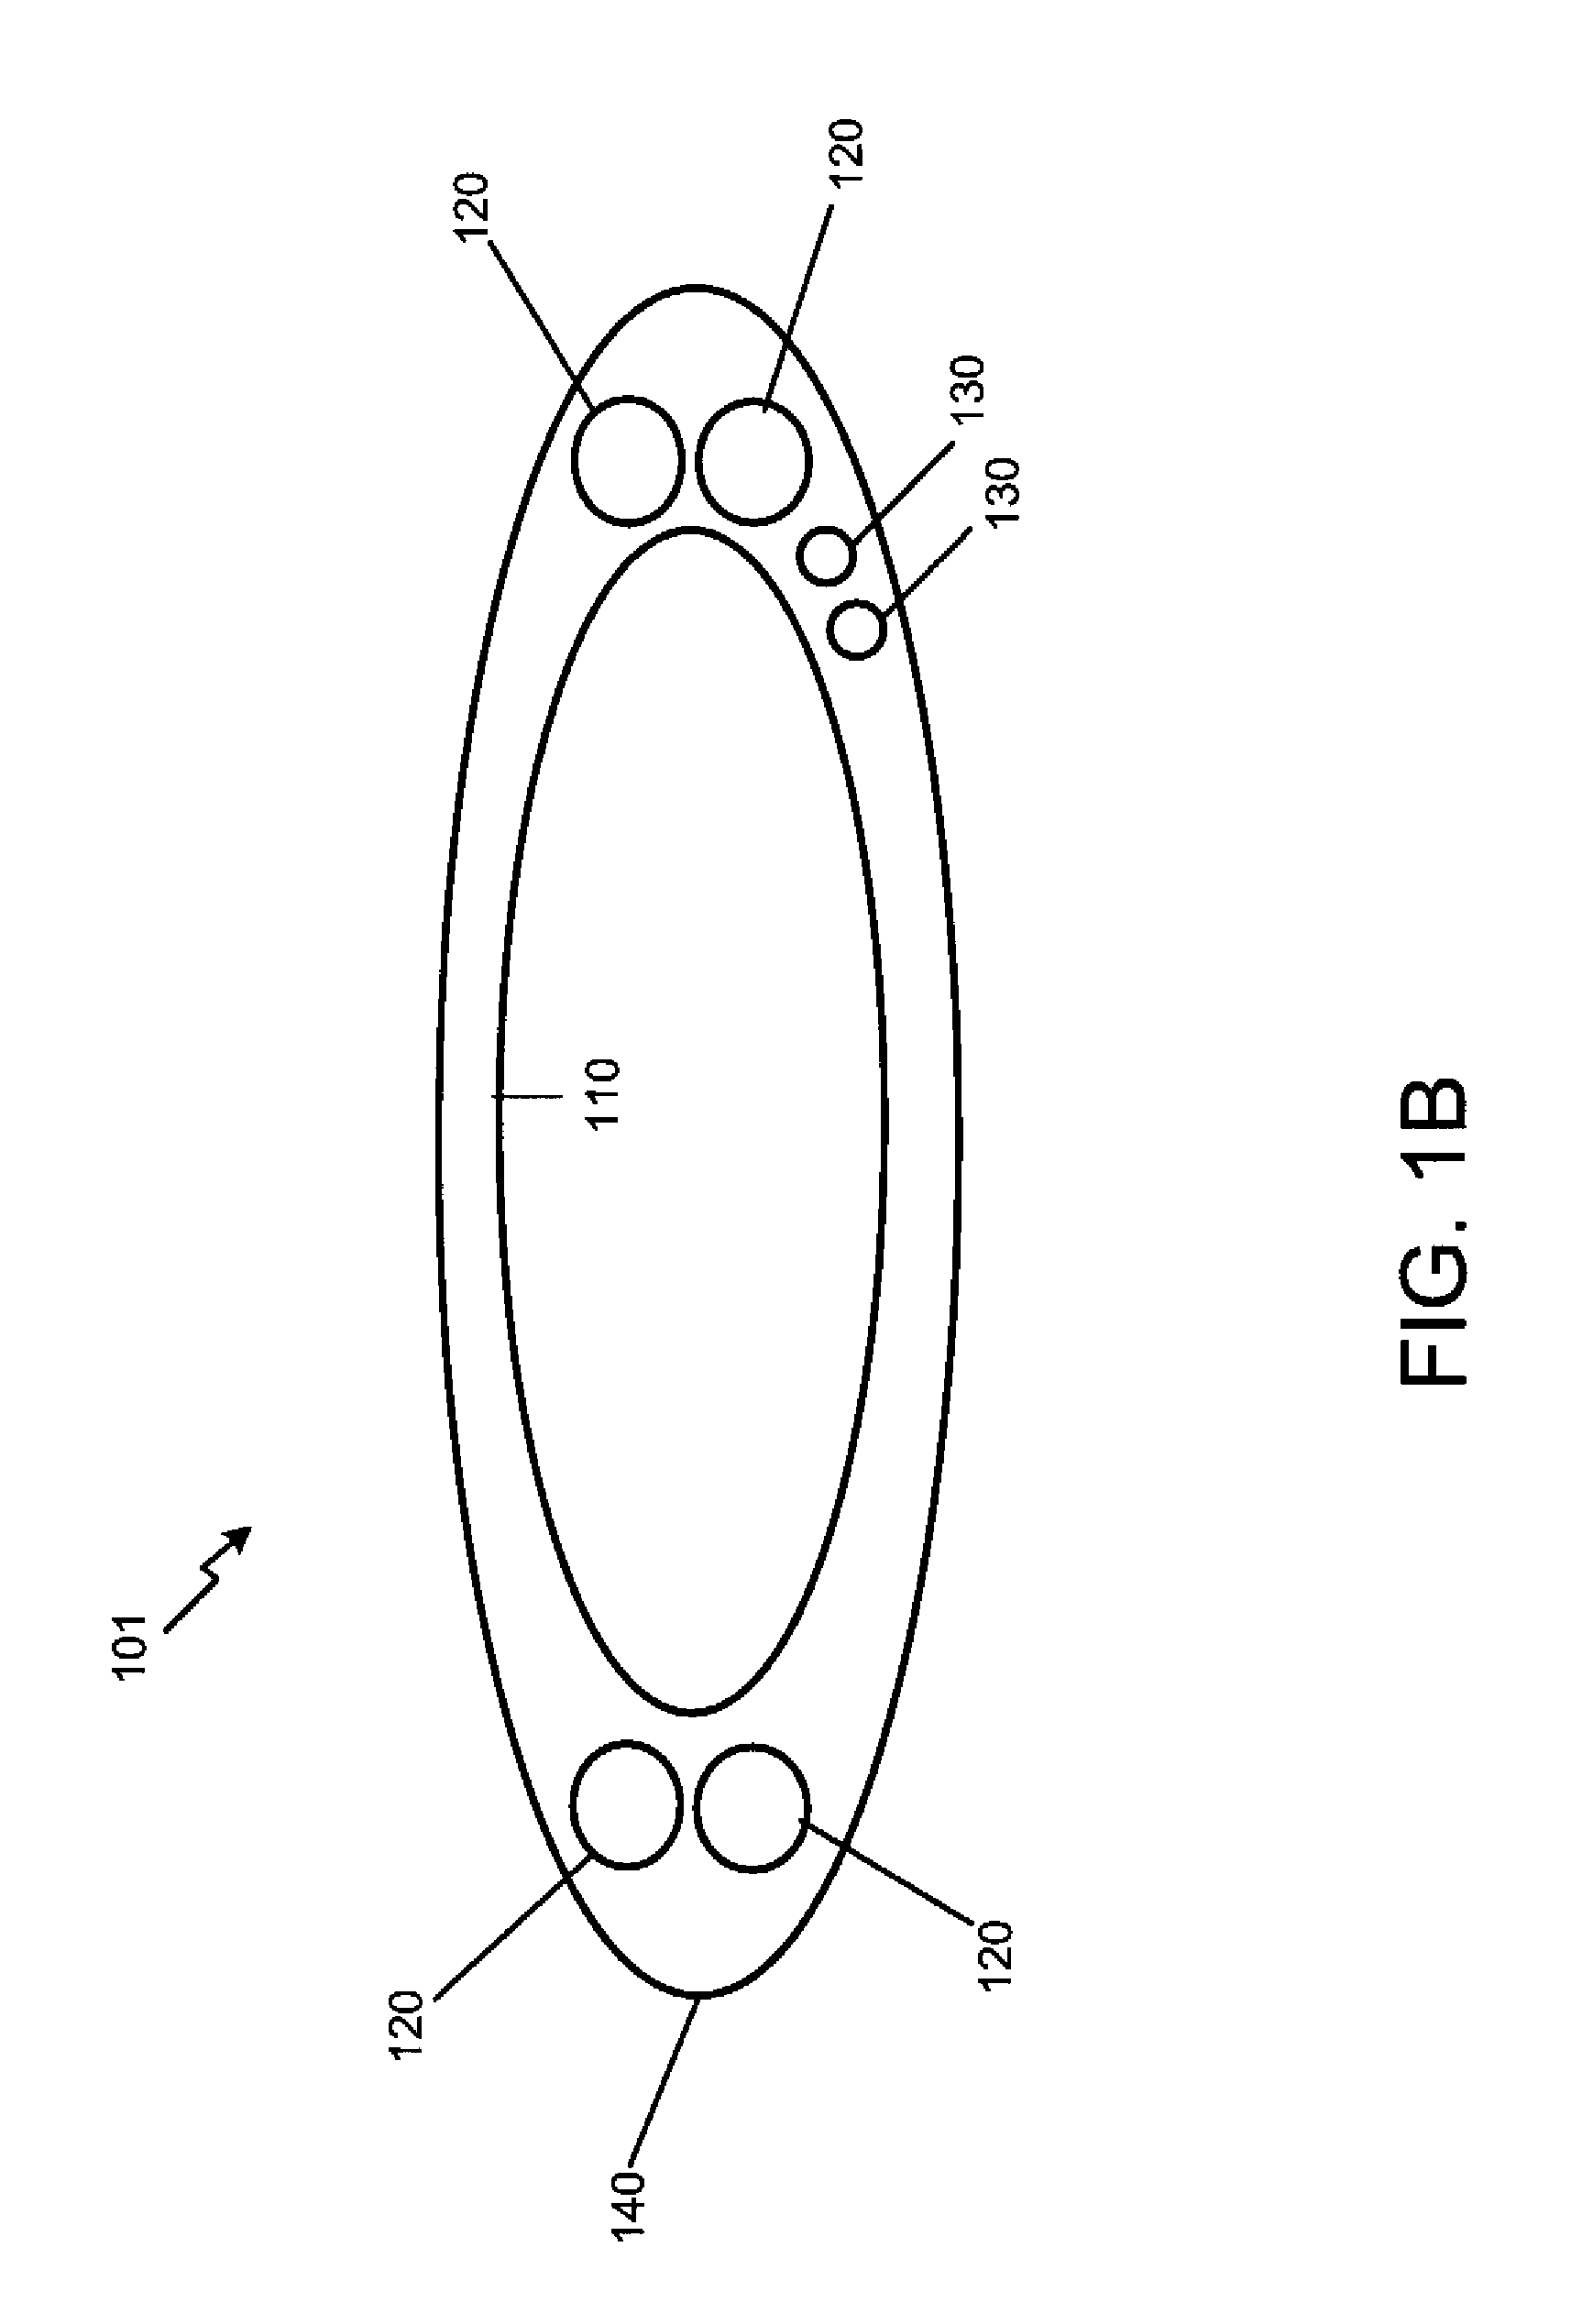 Method and System for Fluid Transmission along Significant Distances